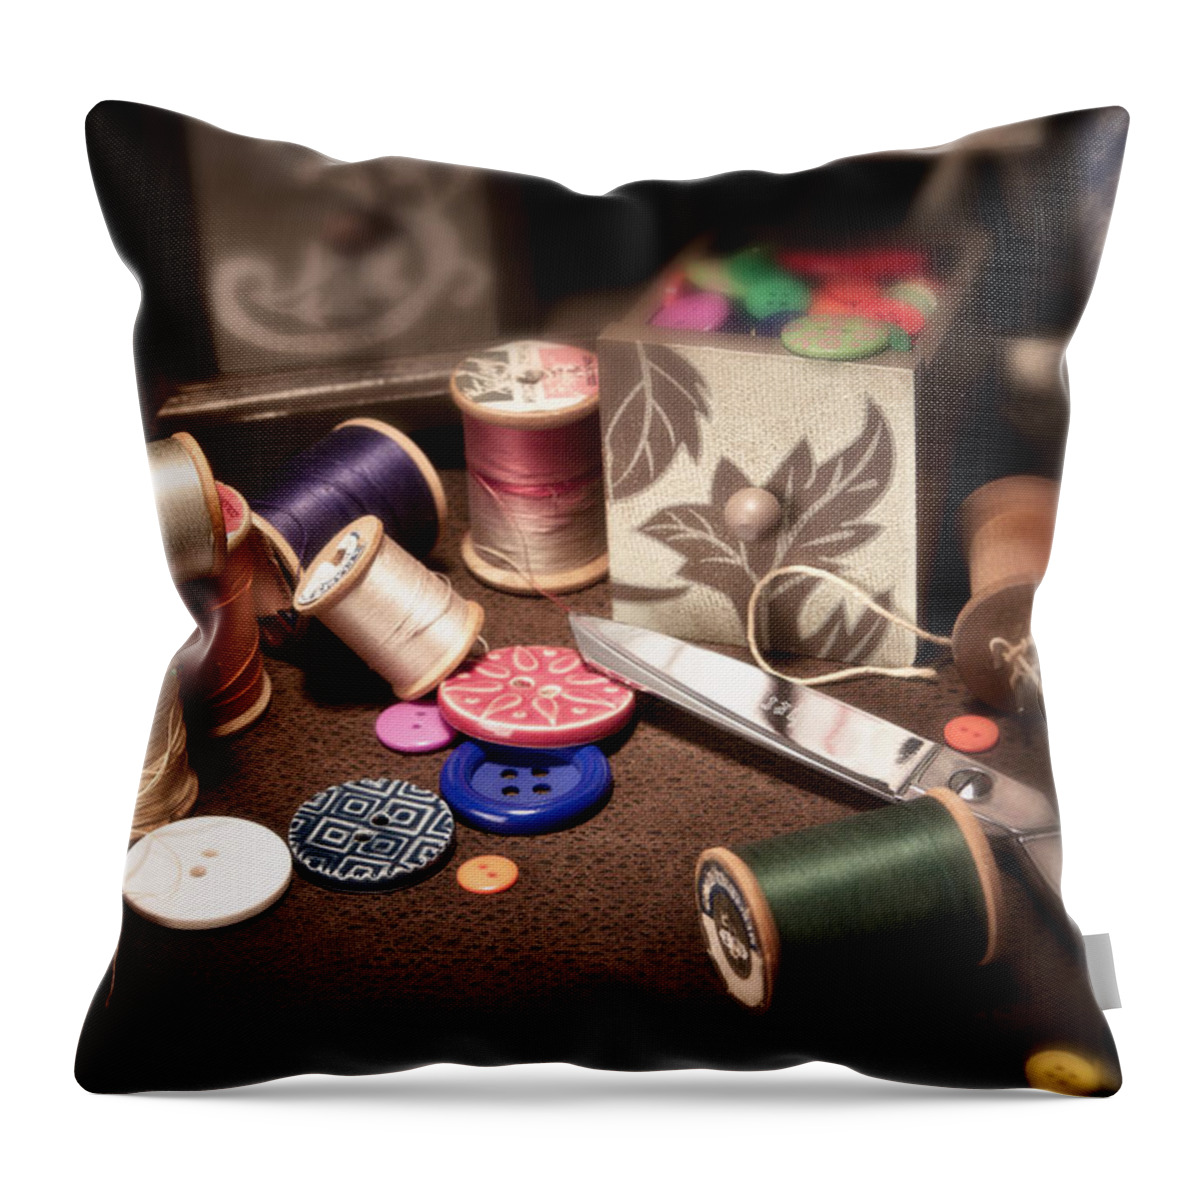 Sewing Throw Pillow featuring the photograph Sewing Notions I by Tom Mc Nemar